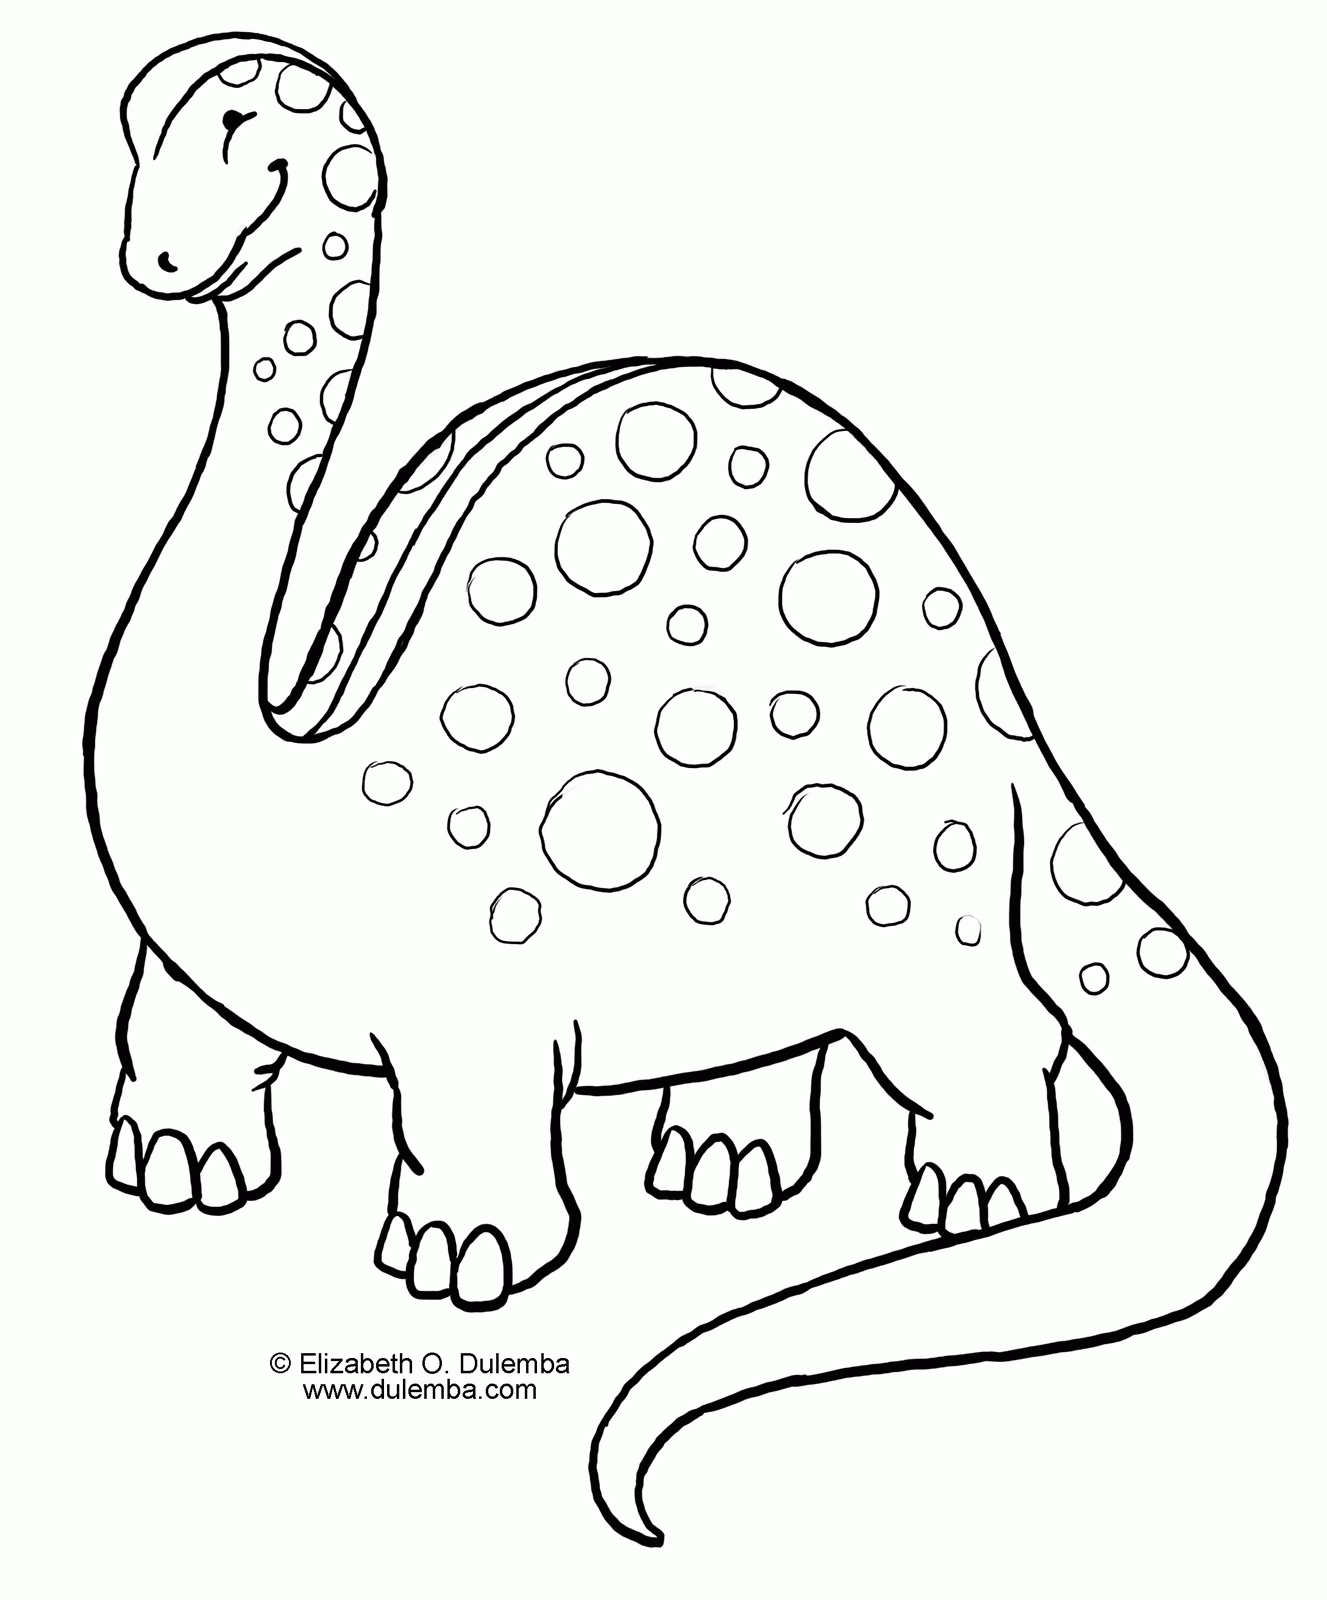 free-simple-dinosaur-coloring-pages-download-free-simple-dinosaur-coloring-pages-png-images